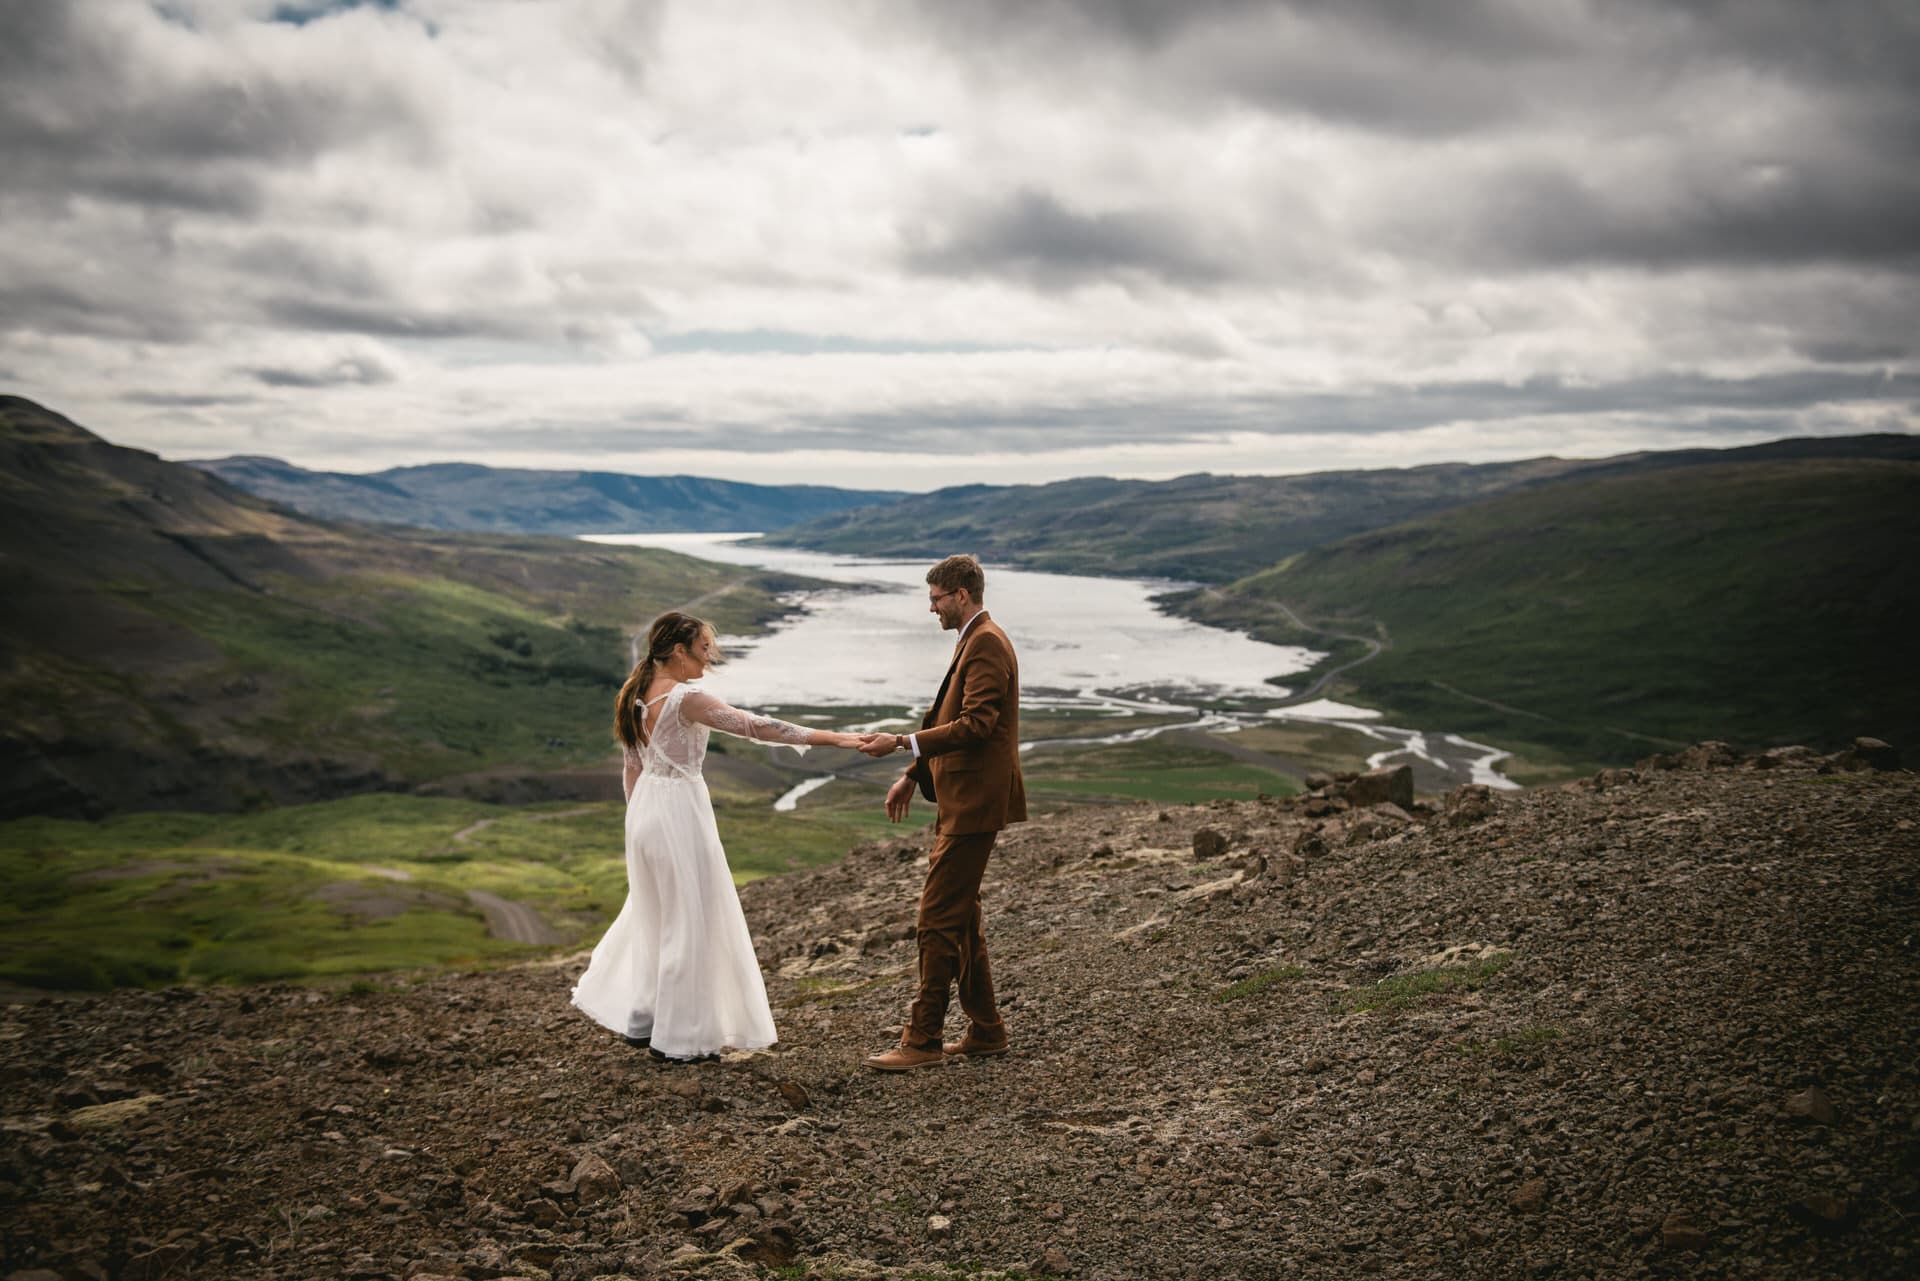 Whimsical photo as the couple dances on a coastal cliff during their Iceland elopement.